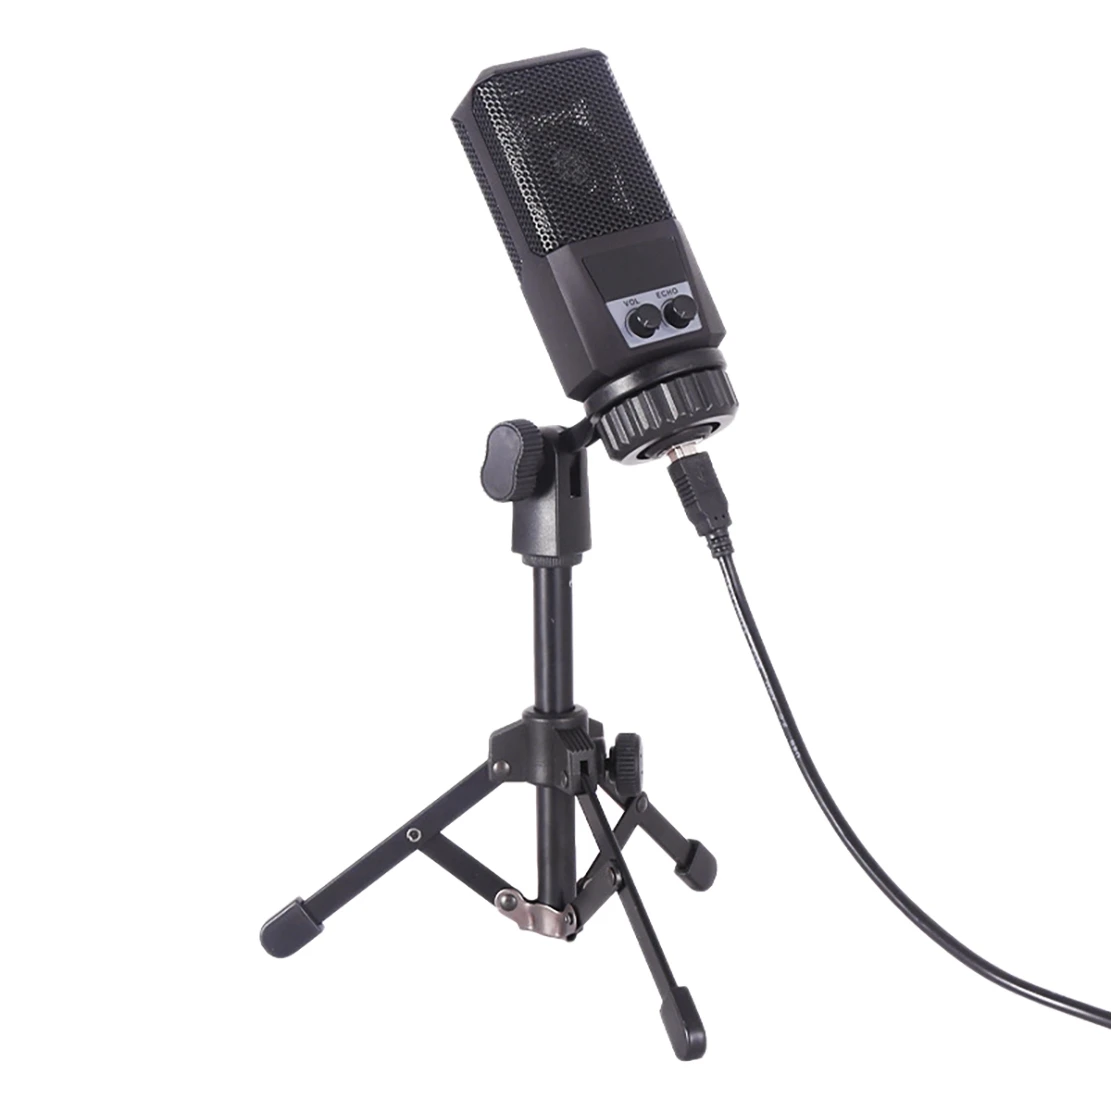 

USB Microphone Computer Microphone With Volume Control Plug And Play Used For Recording Live Broadcasting Games